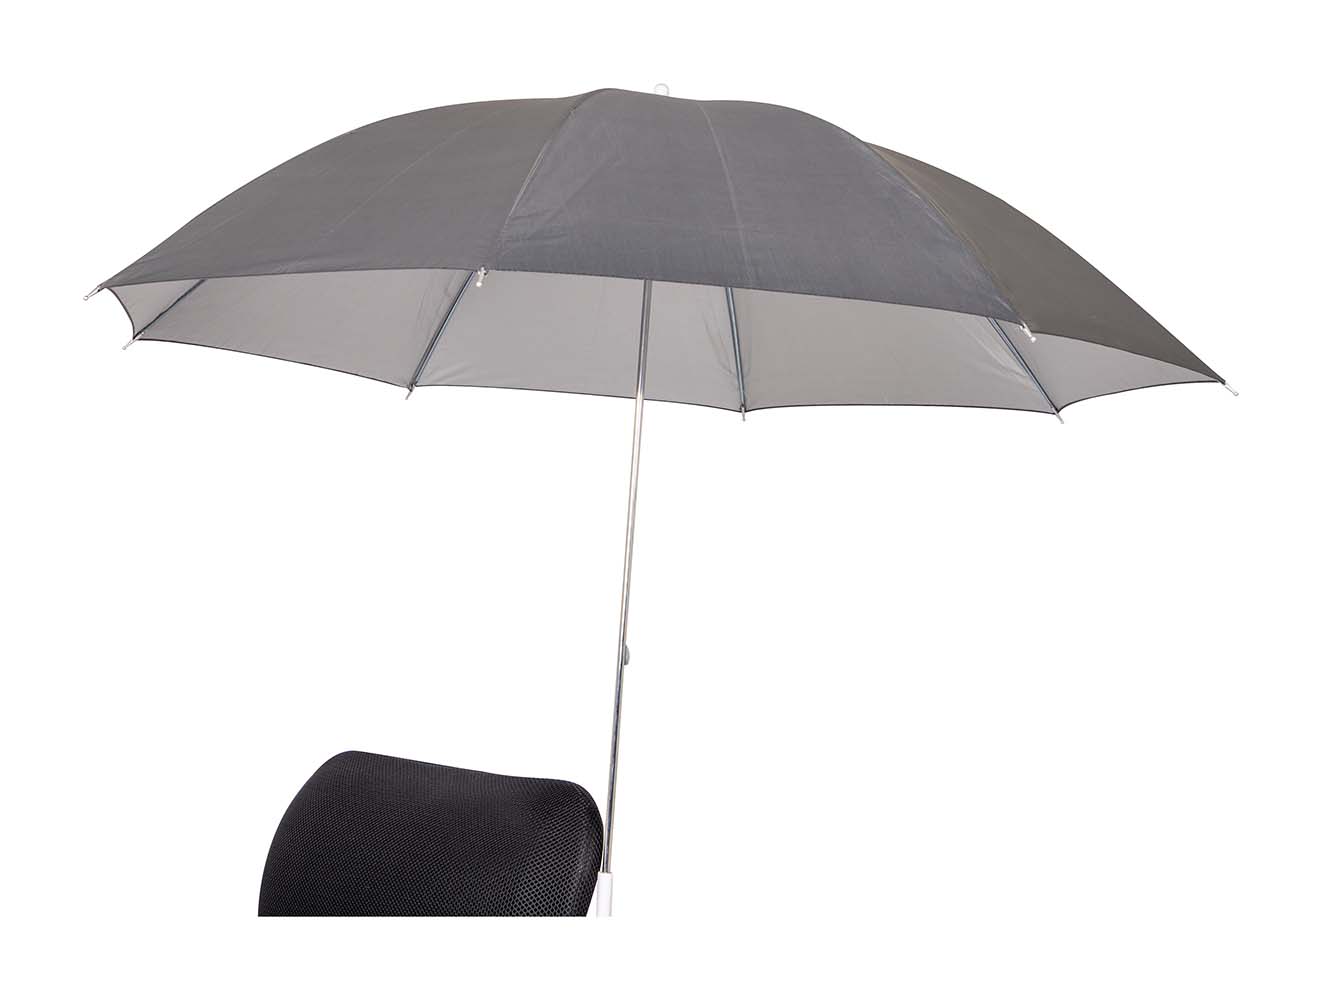 7267280 A practical chair parasol. This sturdy parasol has a galvanised steel frame, chrome handle and luxurious 170T polyester fabric. The parasol is quickly and easily mounted at the desired location by means of a clip. The maximum diameter for mounting is 2.5 cm. Provides protection against harmful solar radiation.A practical chair parasol that is easy to carry. This sturdy parasol has a galvanized steel frame, a chromed handle and luxurious 170T polyester fabric. By means of a clamp, the parasol can be attached quickly and easily to almost any chair. The maximum thickness for fastening is 2.5 cm. In addition, it has a silver coating for extra UV protection.